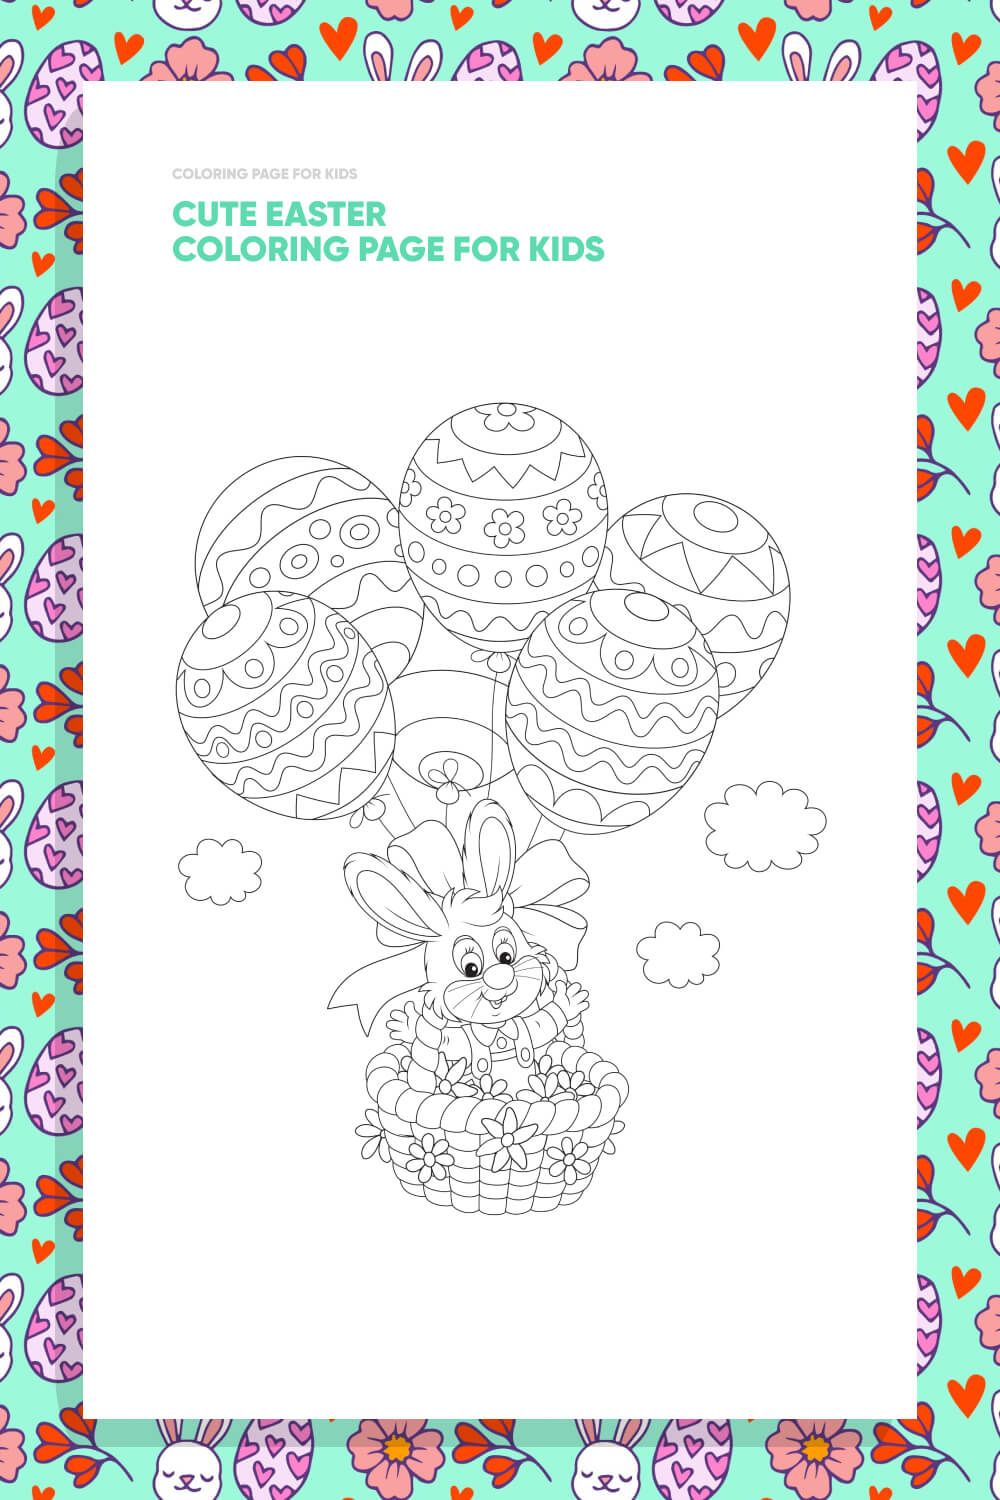 Cute Easter Coloring Page for Kids pinterest.